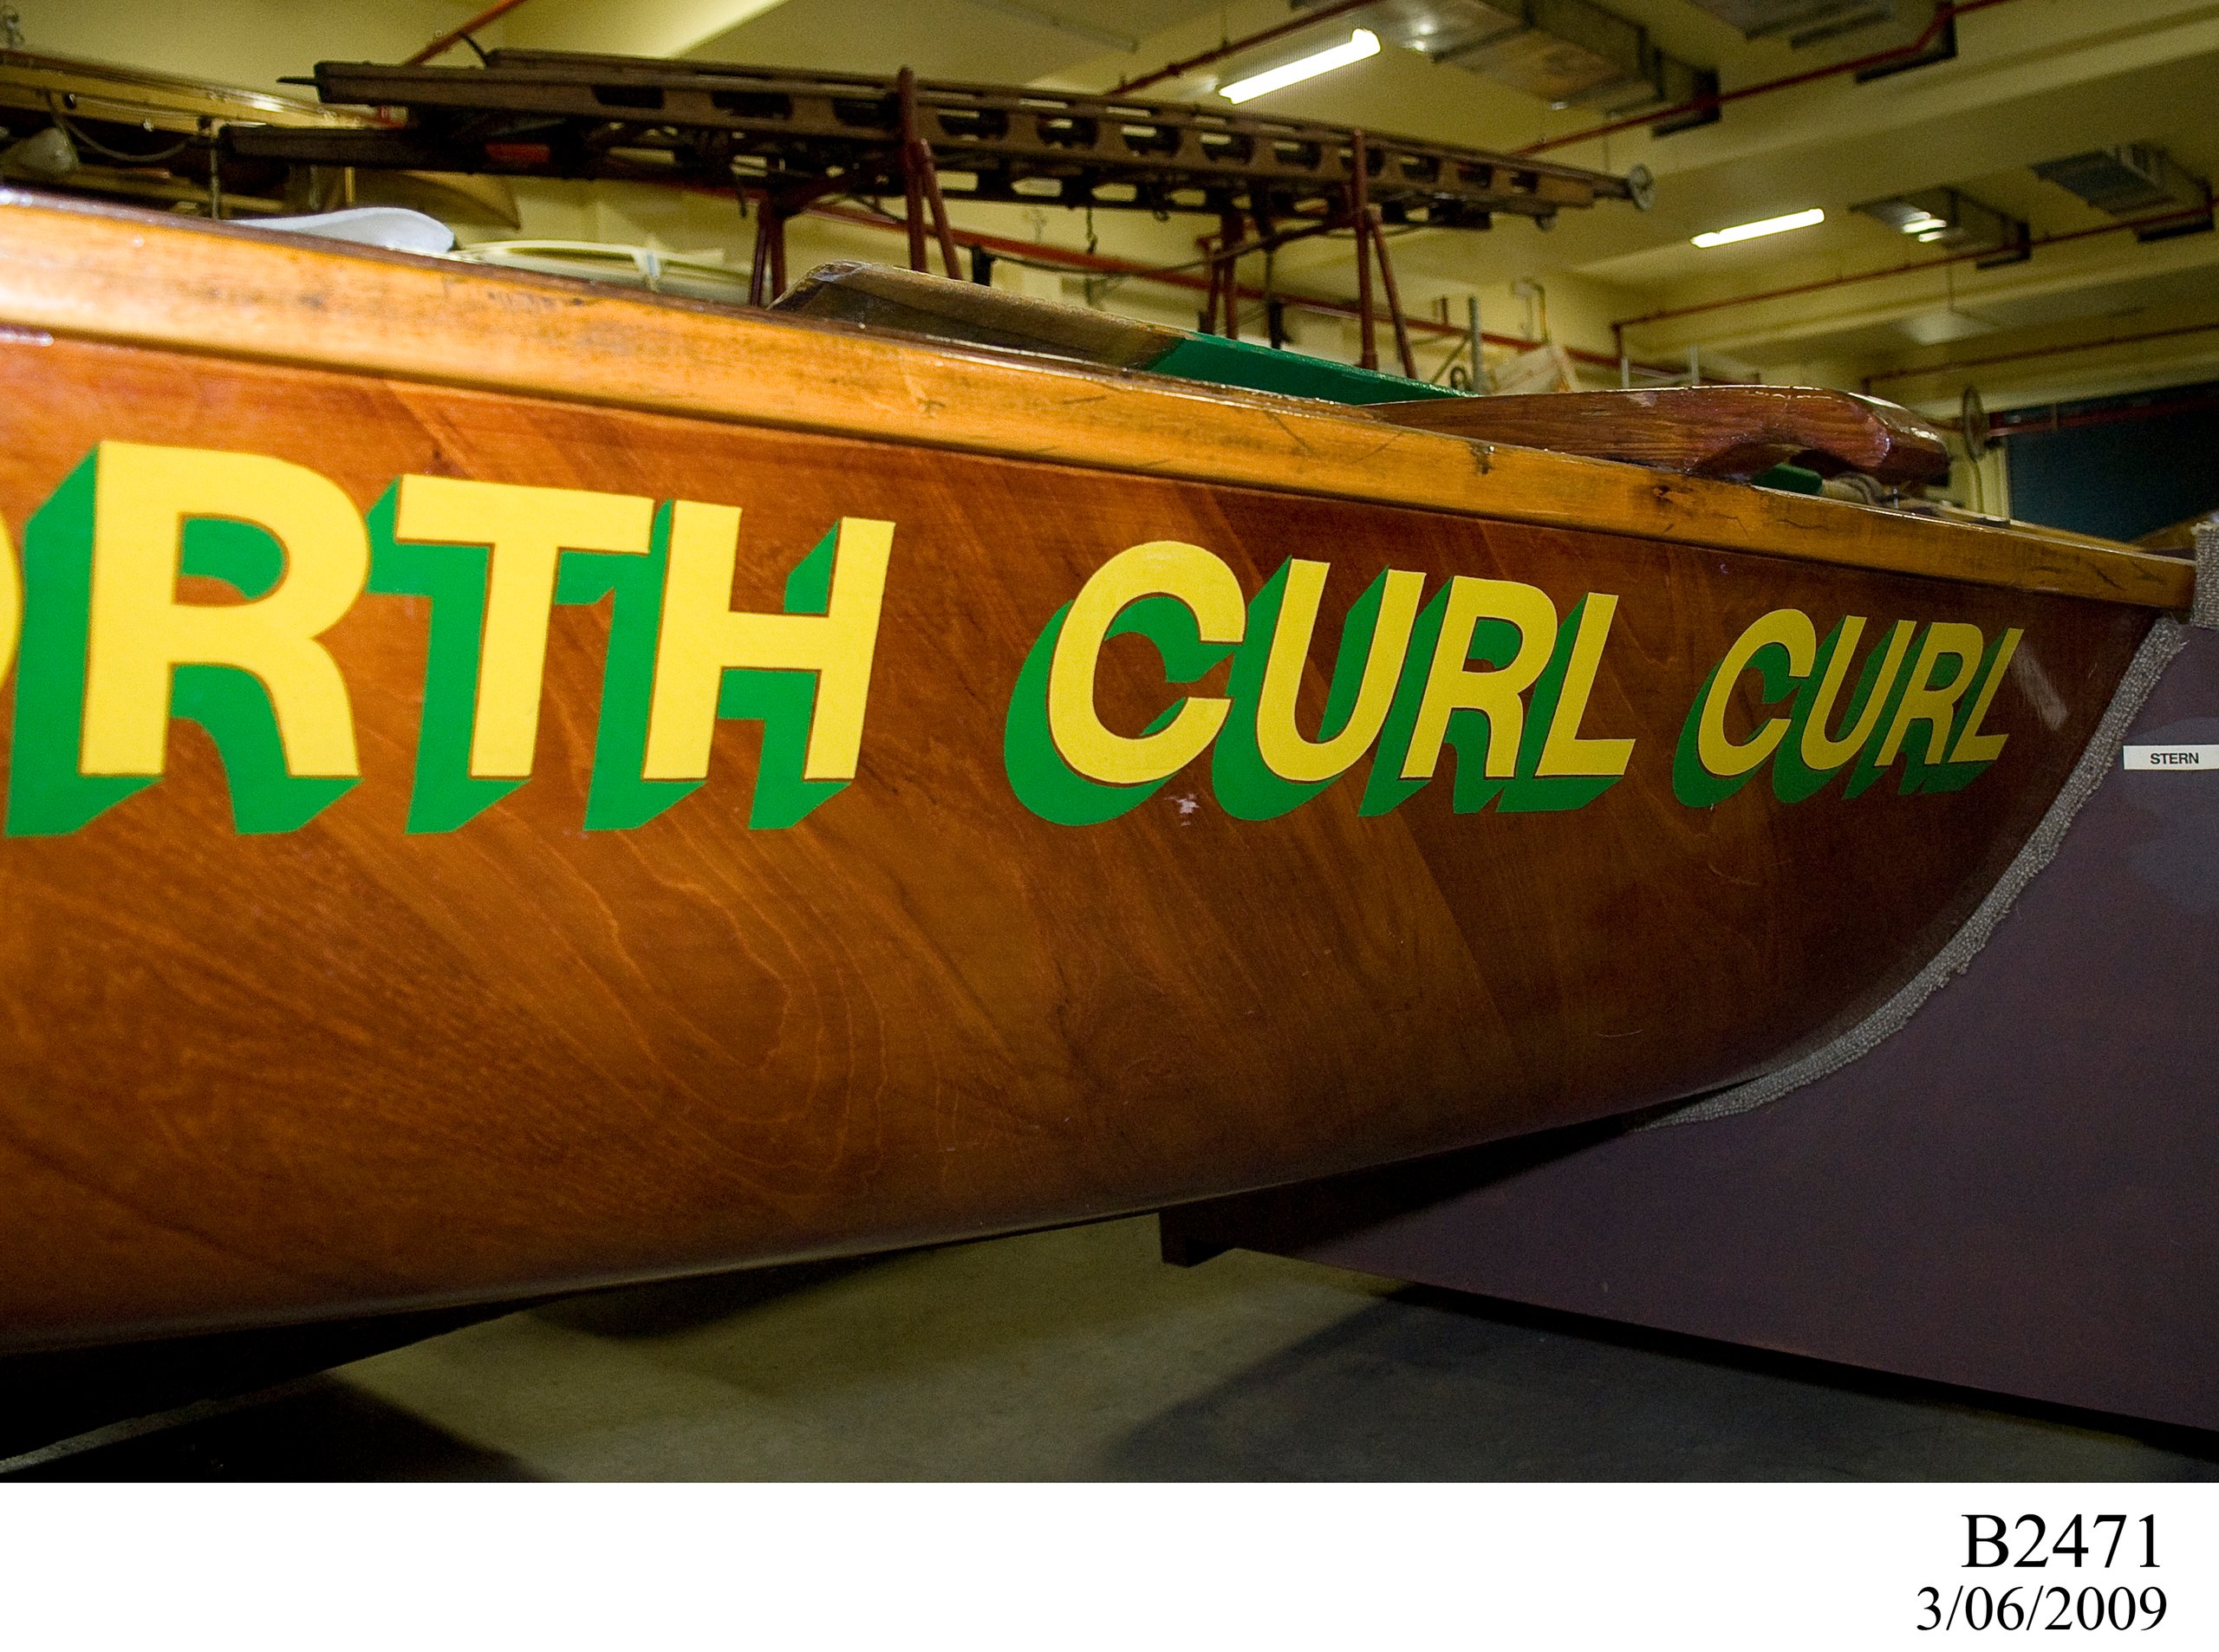 Surfboat used by North Curl Curl Surf Life Saving Club